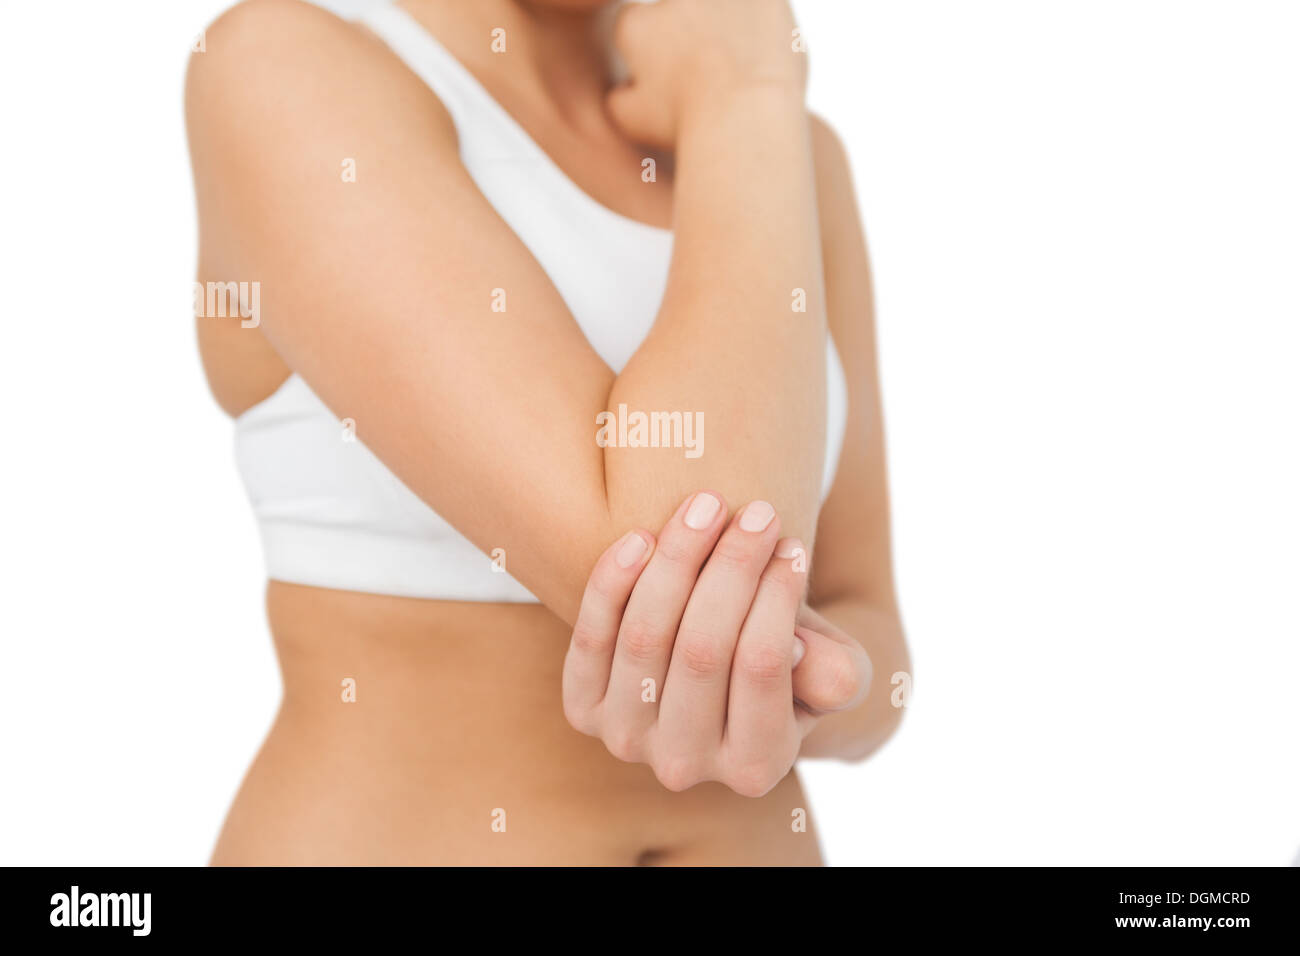 Young sporty woman touching her sore elbow Stock Photo